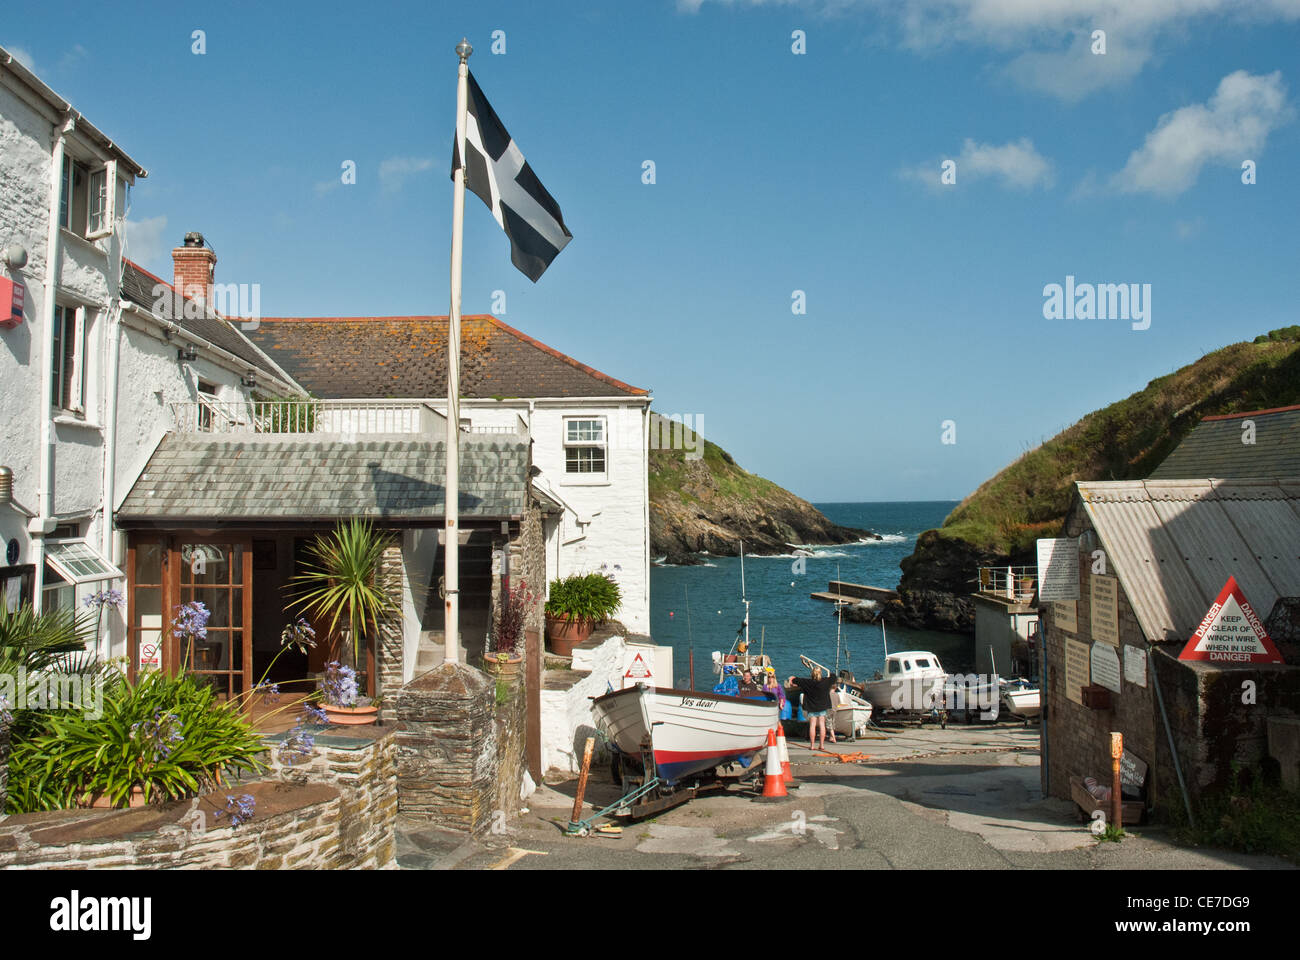 Portloe Cove and Harbour in summer with Cornish flag, small boats, traditional fishing cottages, blue sea and sky. Stock Photo